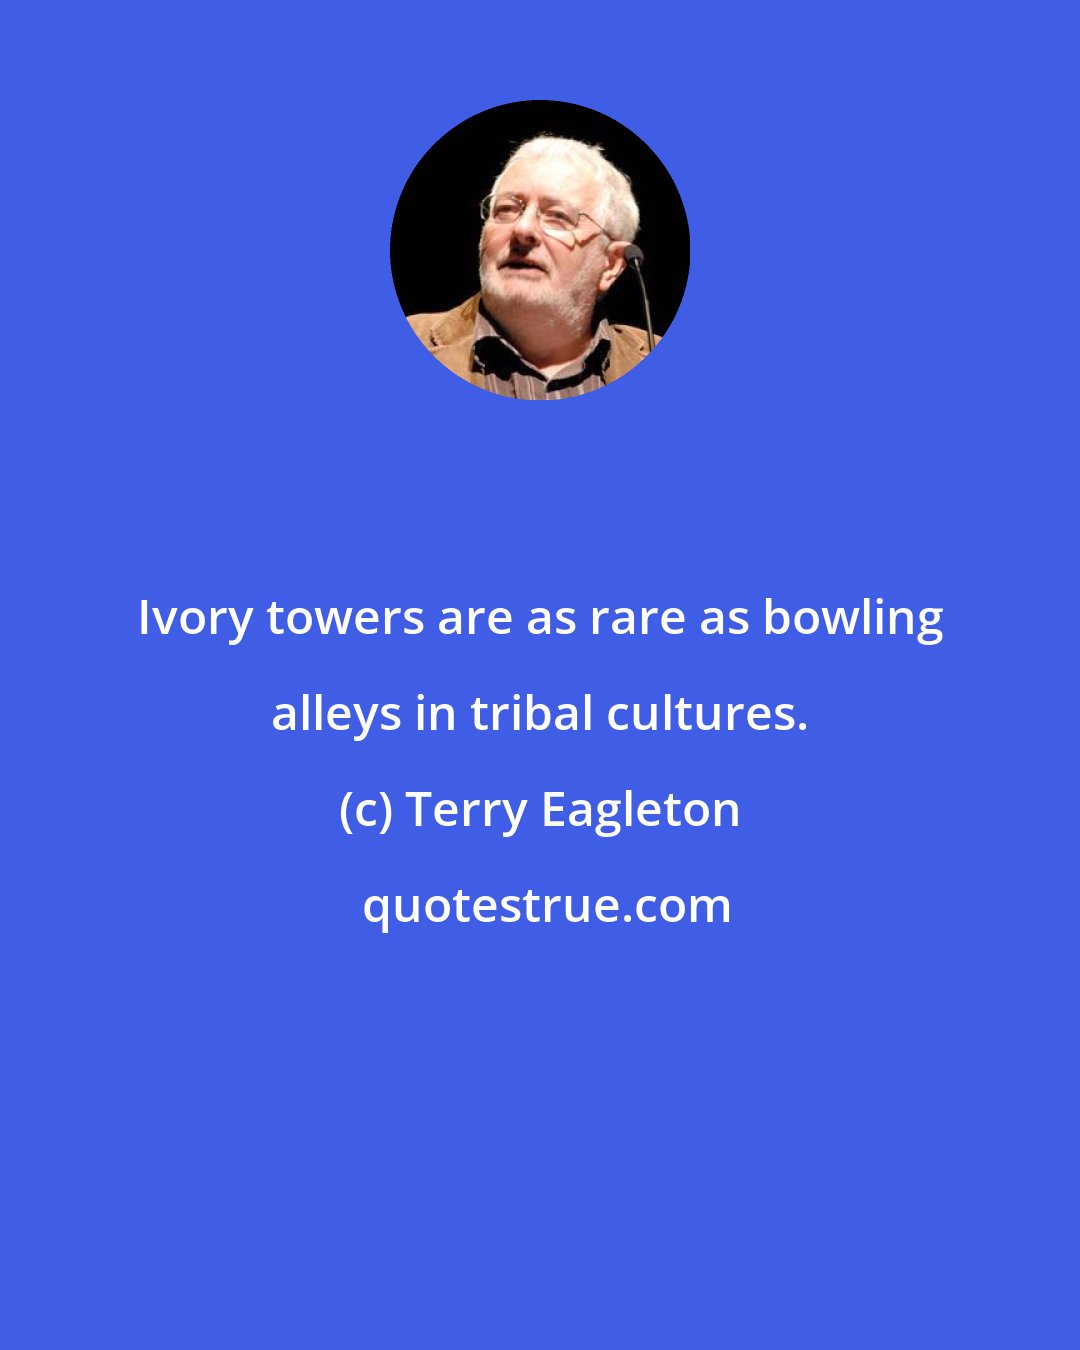 Terry Eagleton: Ivory towers are as rare as bowling alleys in tribal cultures.